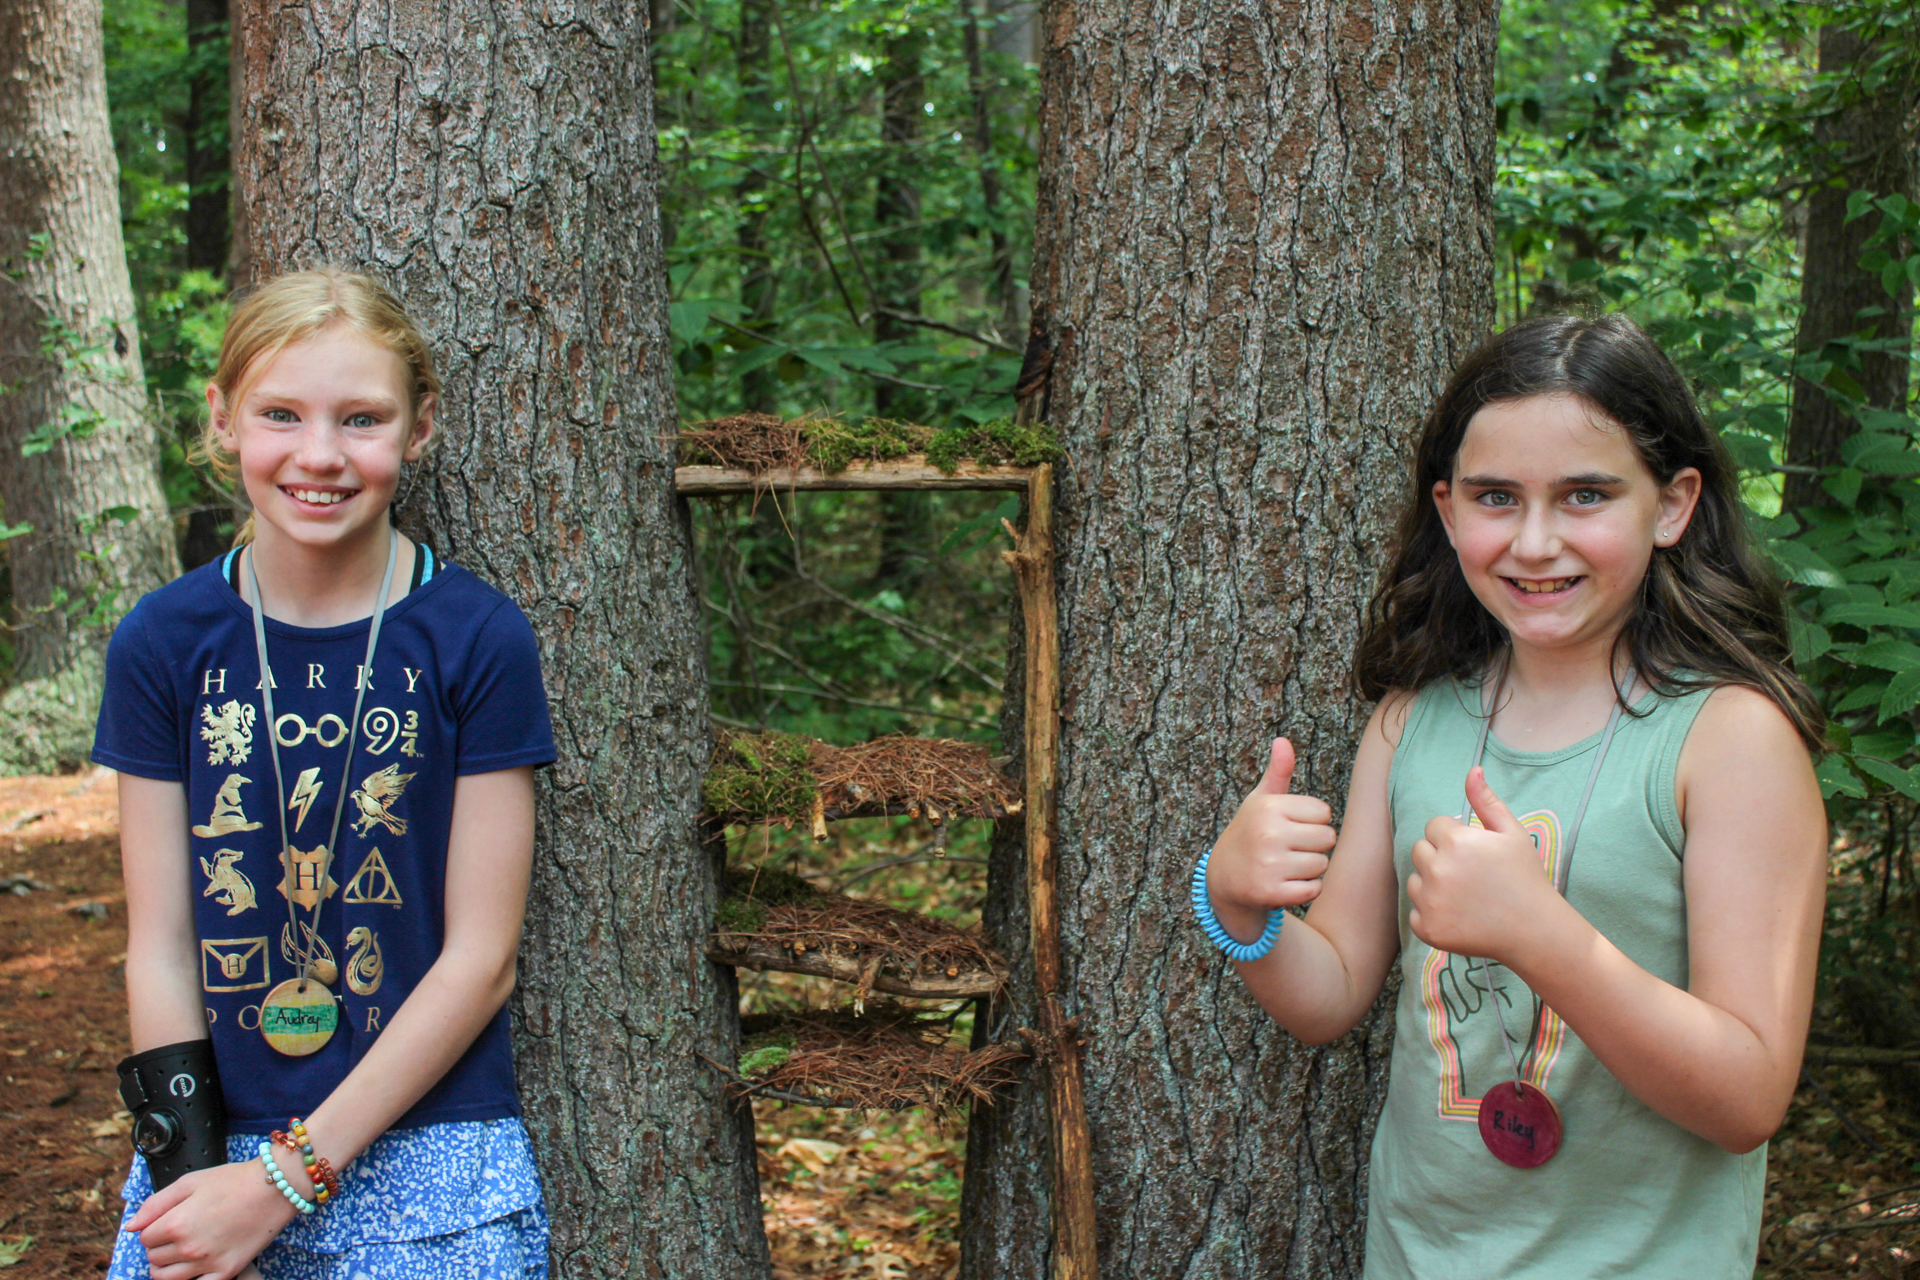 Two Broadmoor campers standing in front of two pine trees, between which they have built a multi-tiered structure of sticks, moss, and pine needles. Both children are smiling and one has two thumbs up.